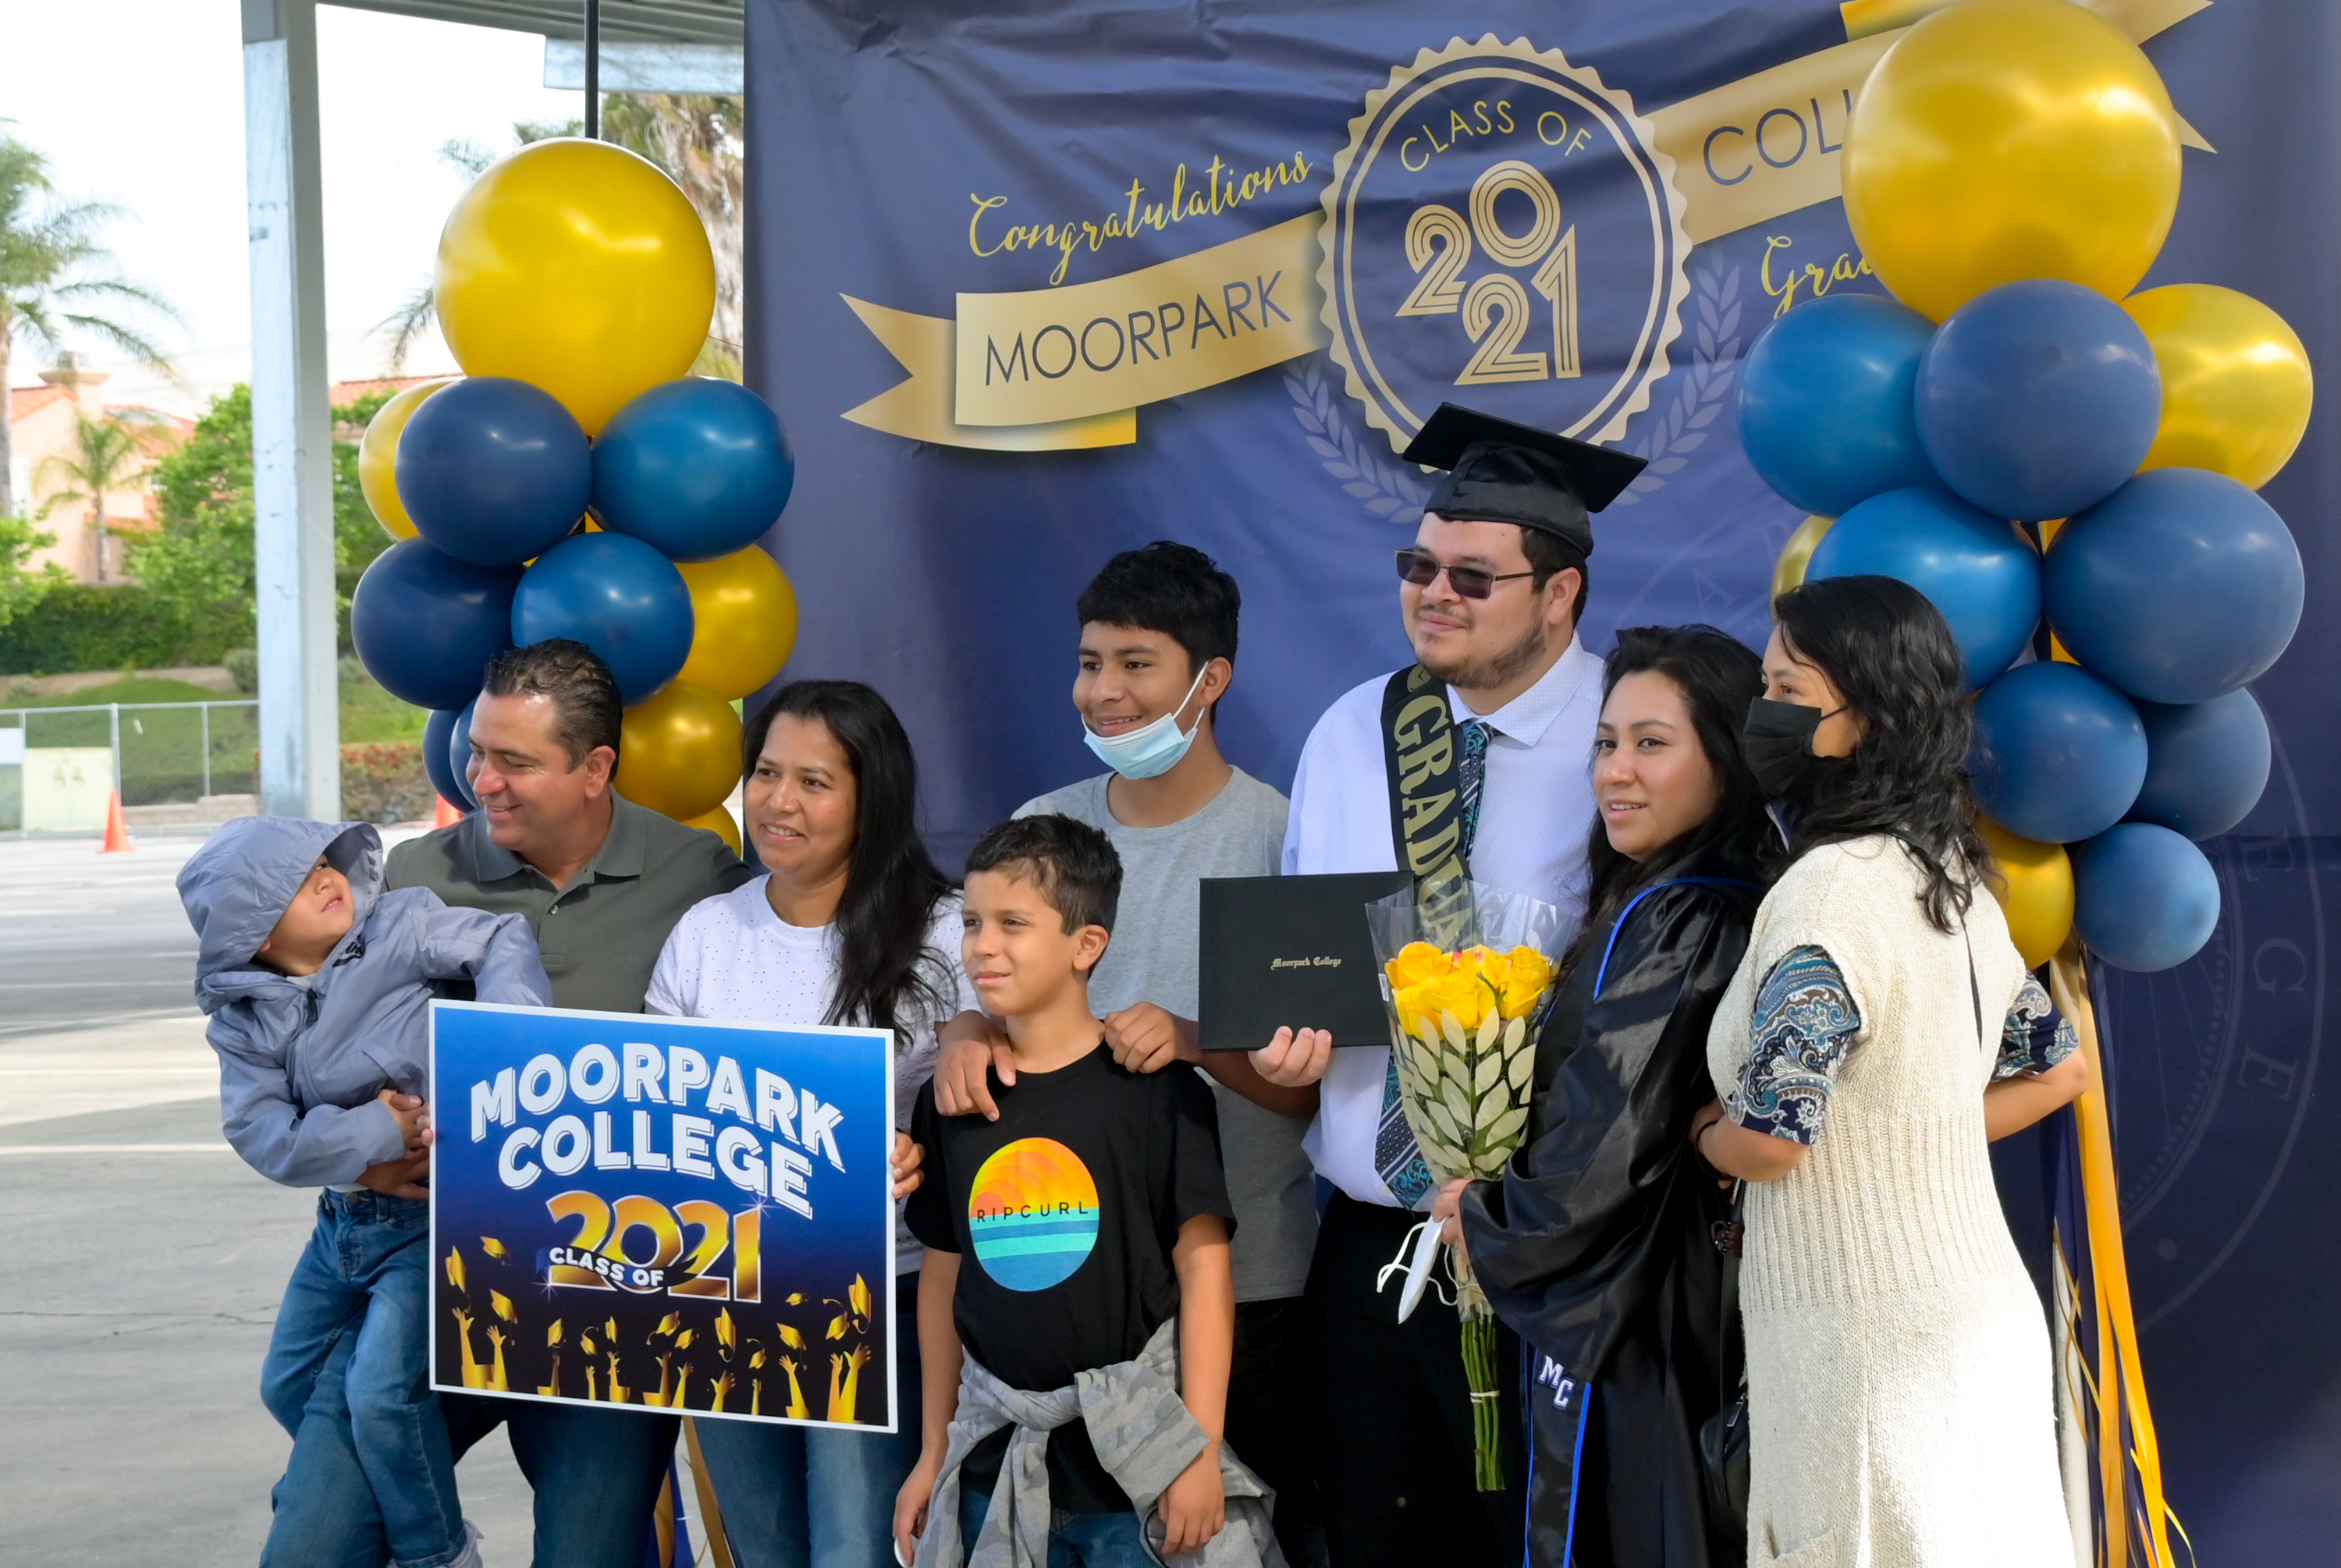 A family poses proudly for a photo with their MC graduate